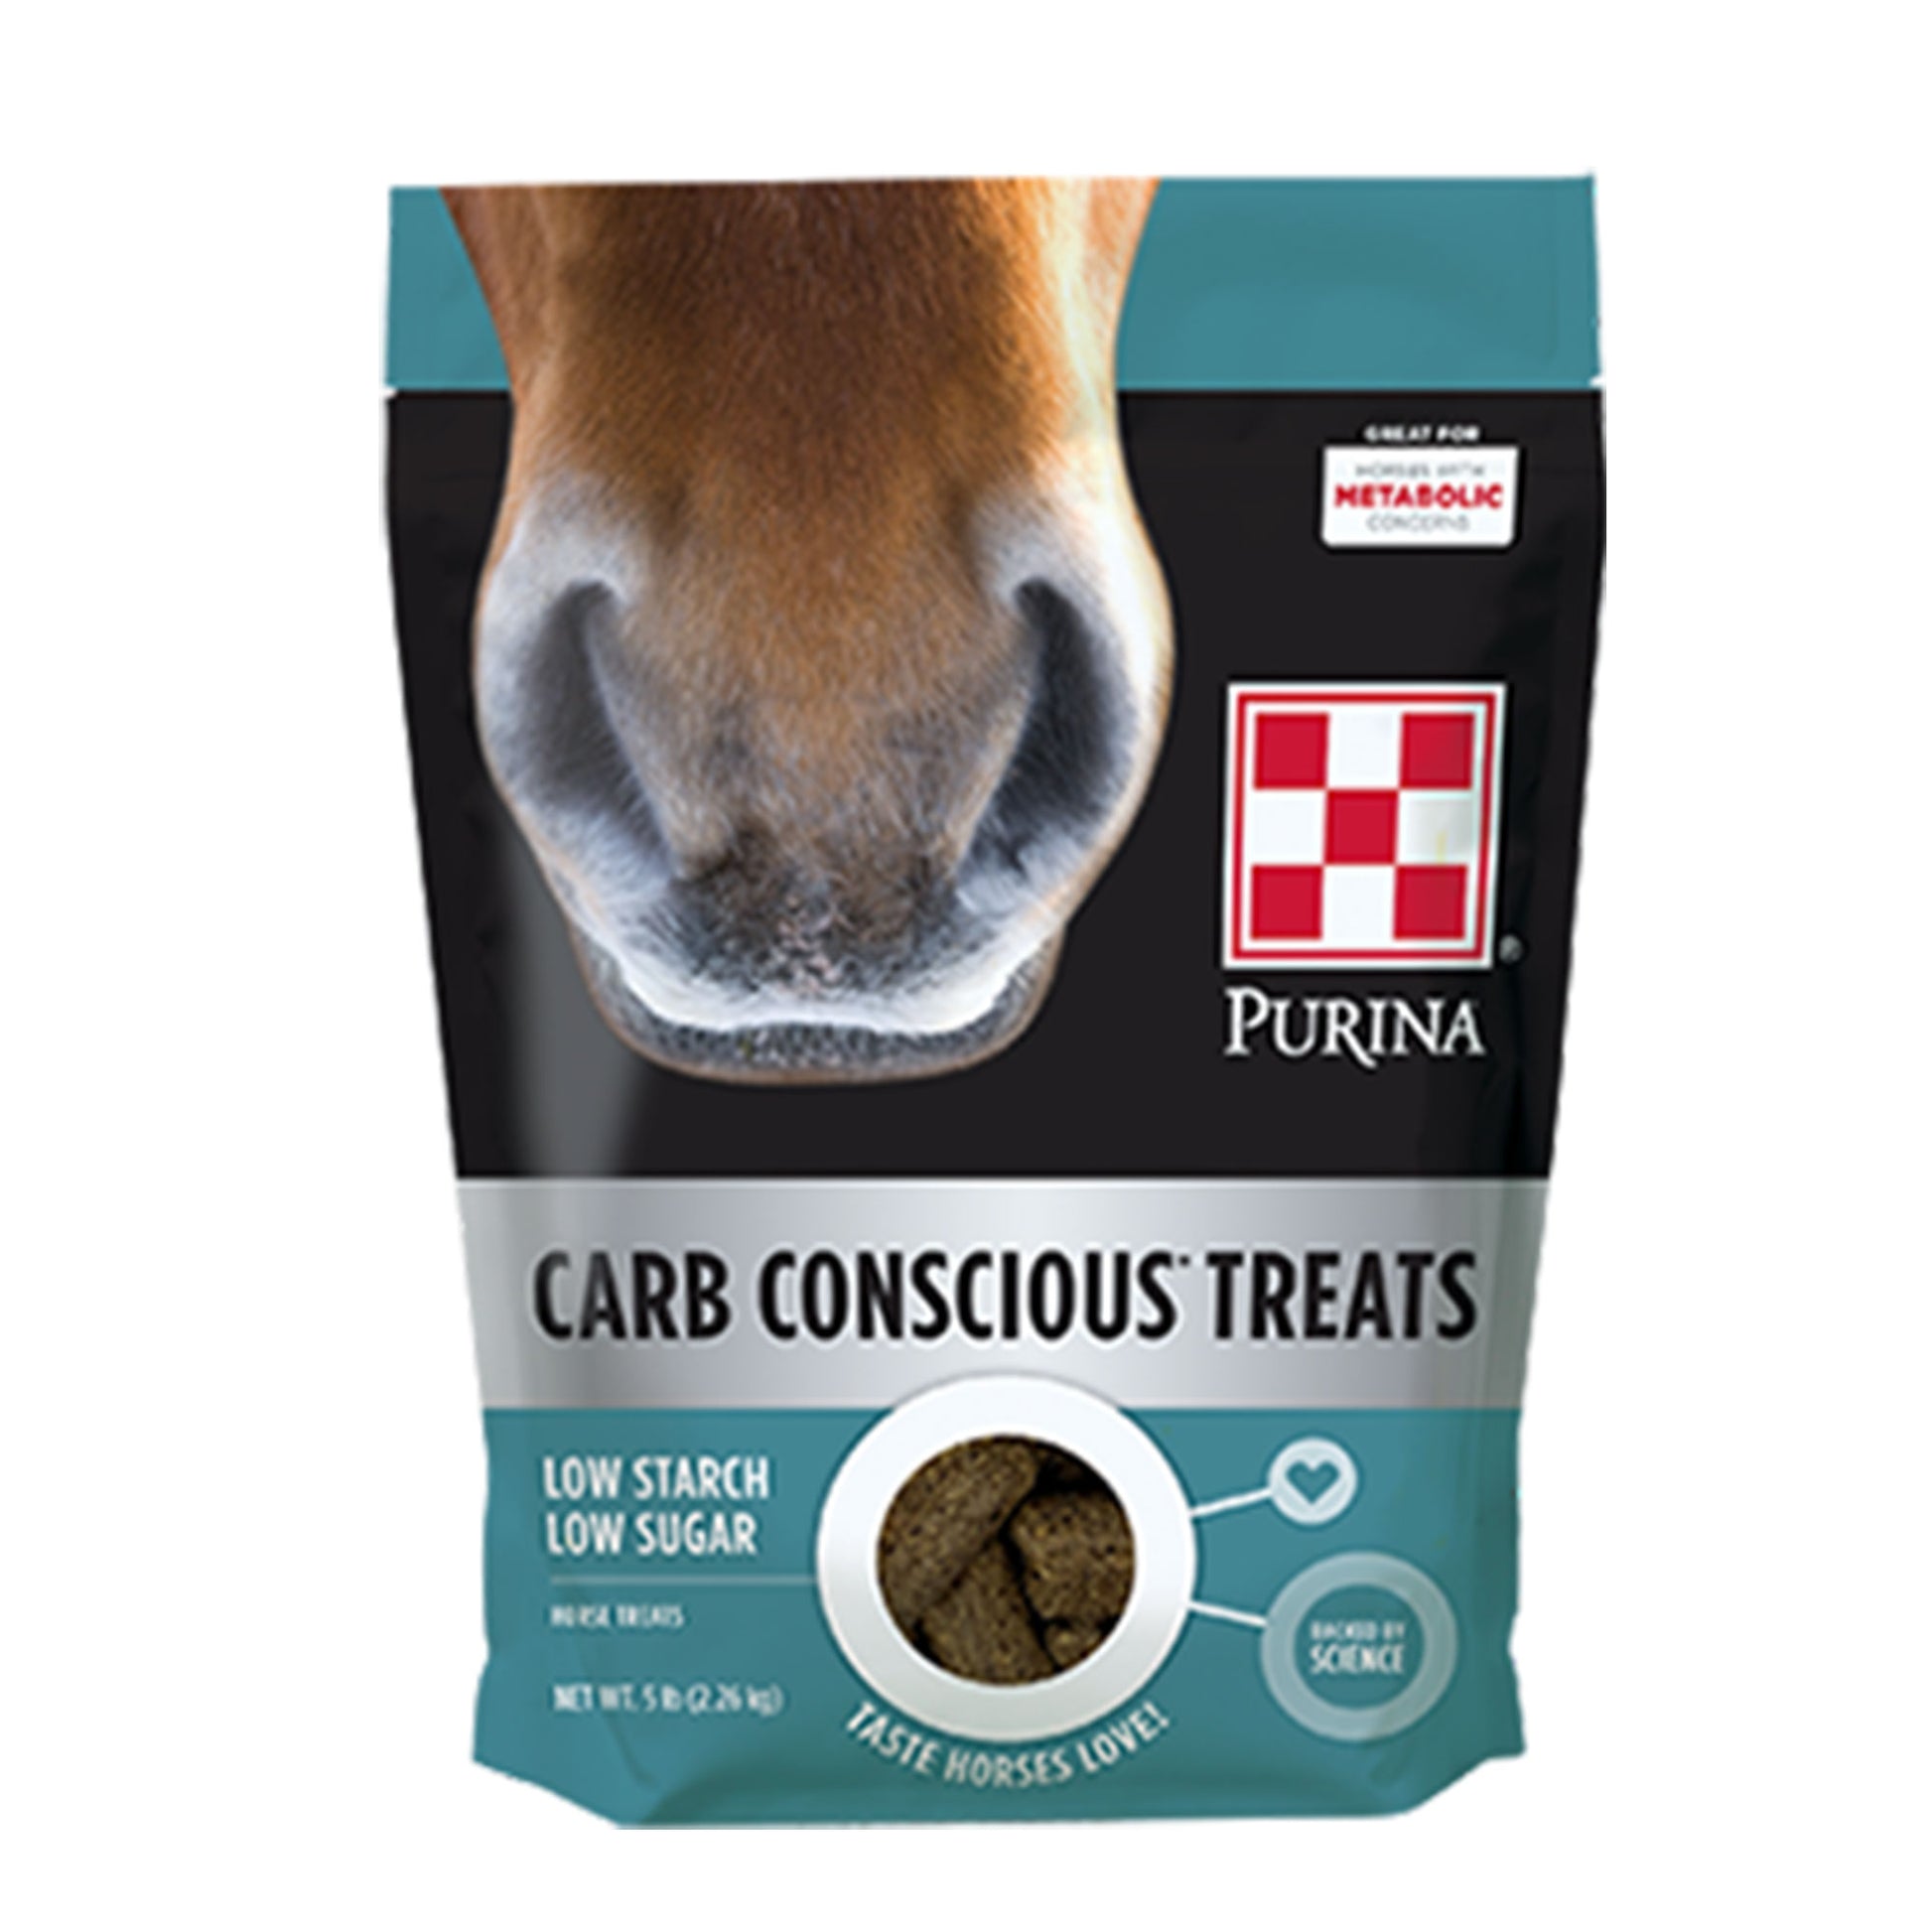 Purina Carb Conscious Horse Treats 5 Pound Pouch